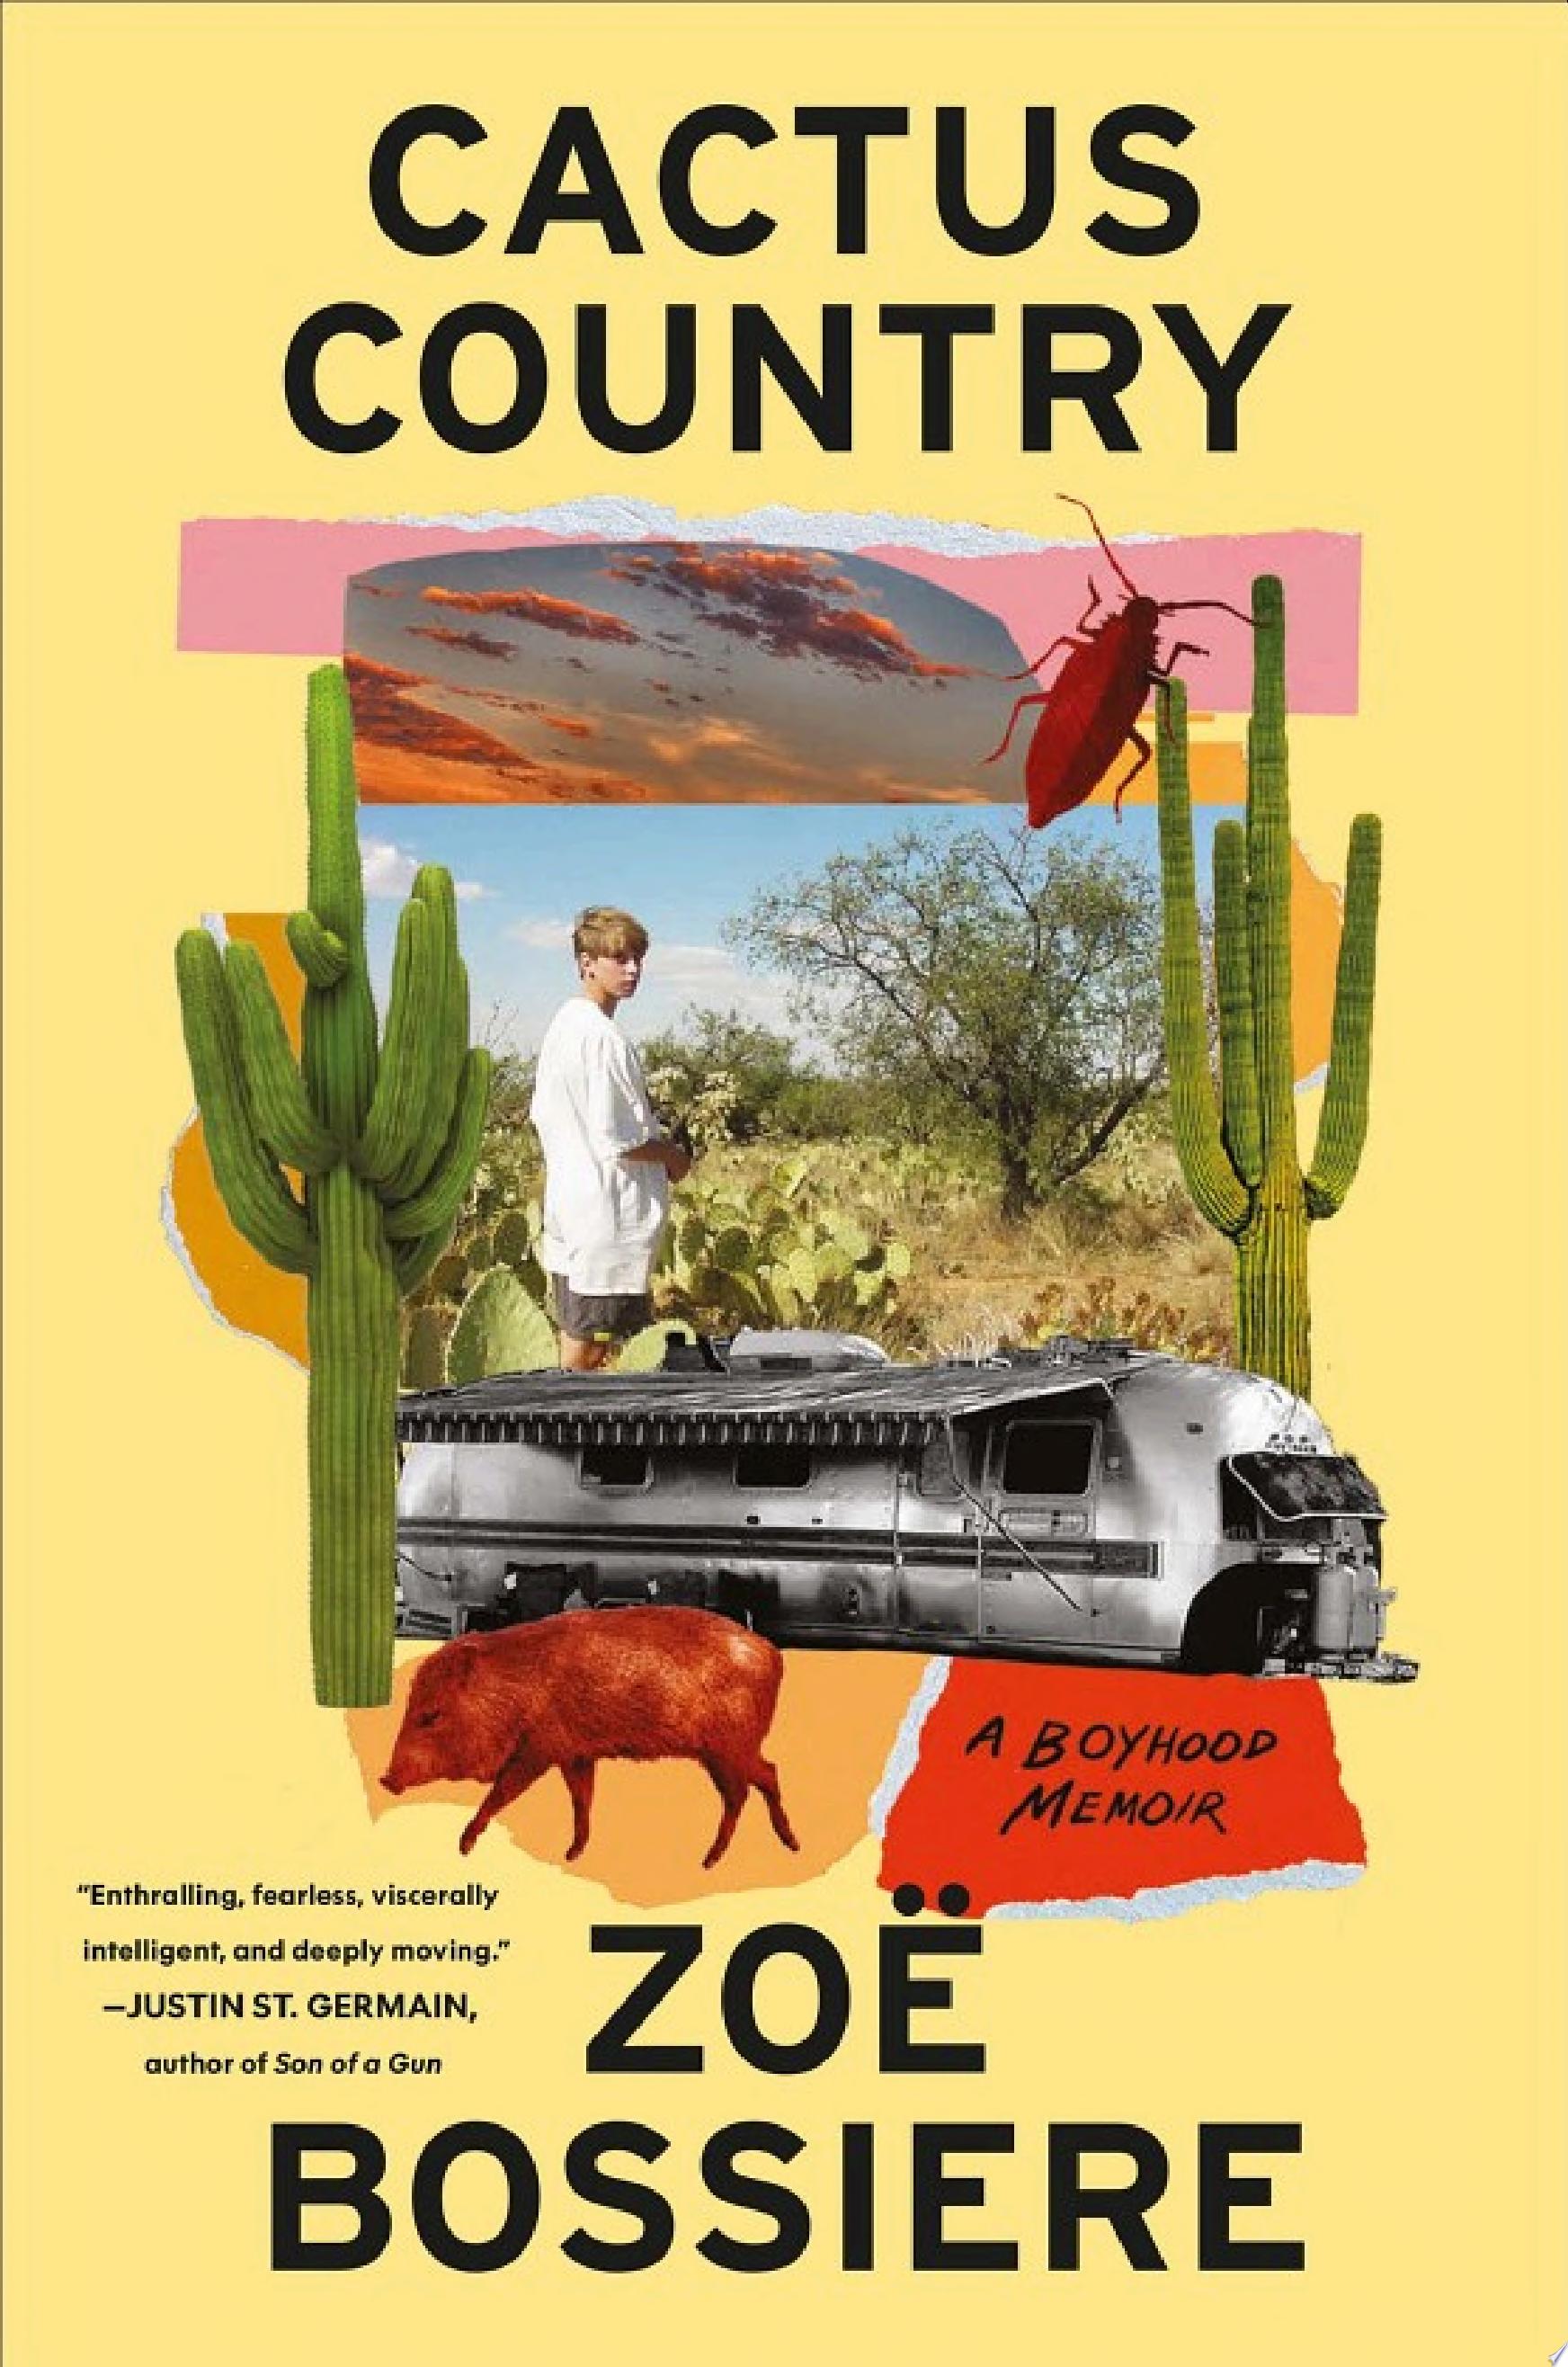 Image for "Cactus Country"